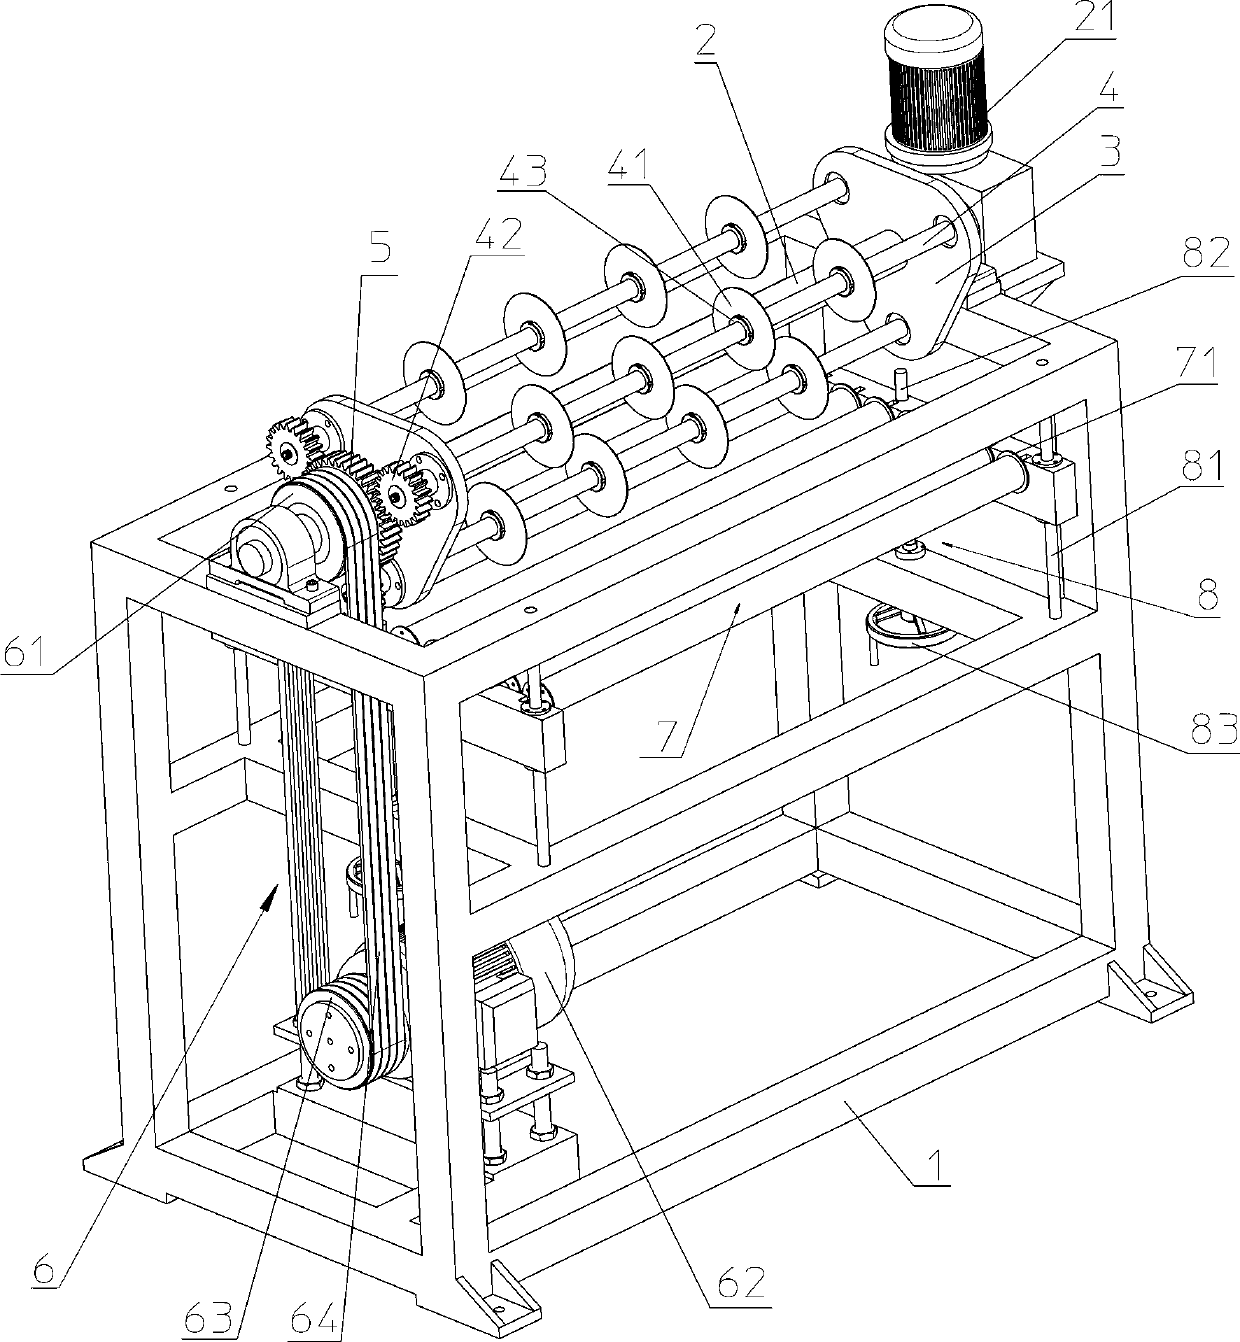 Online grooving machine for section bars